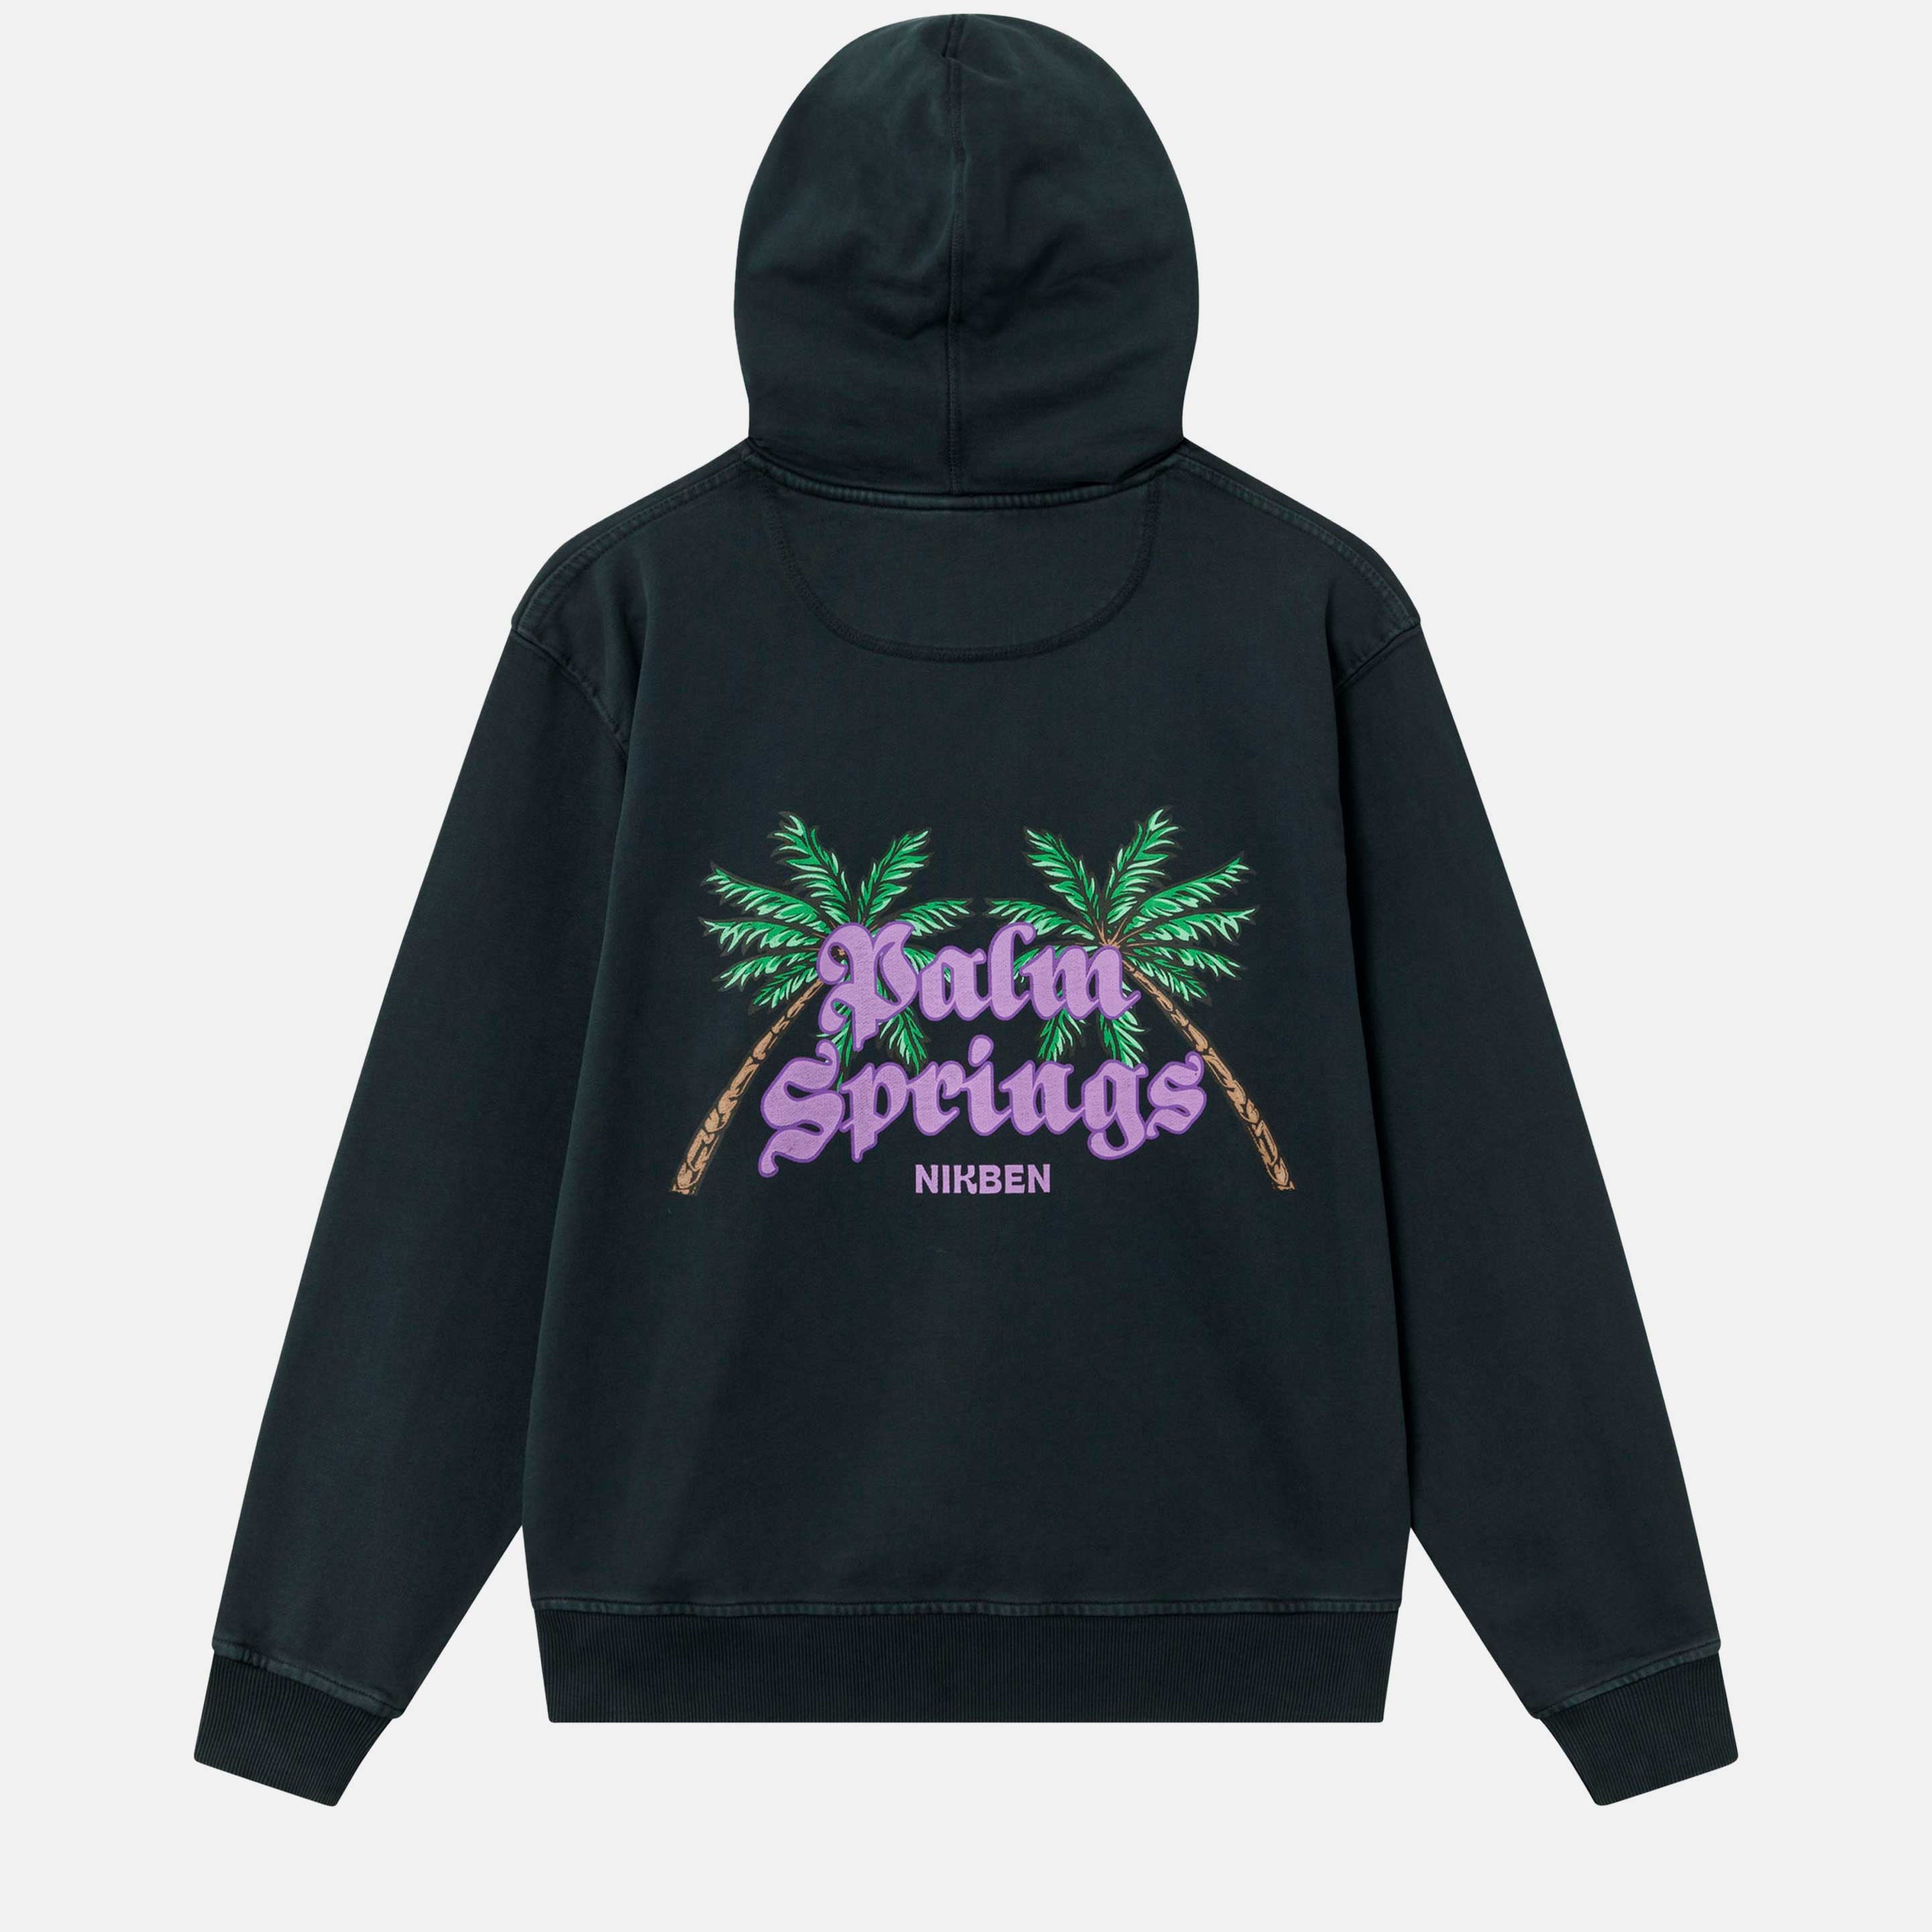 Back view of black unisex hoodie with palms and purple text back print.